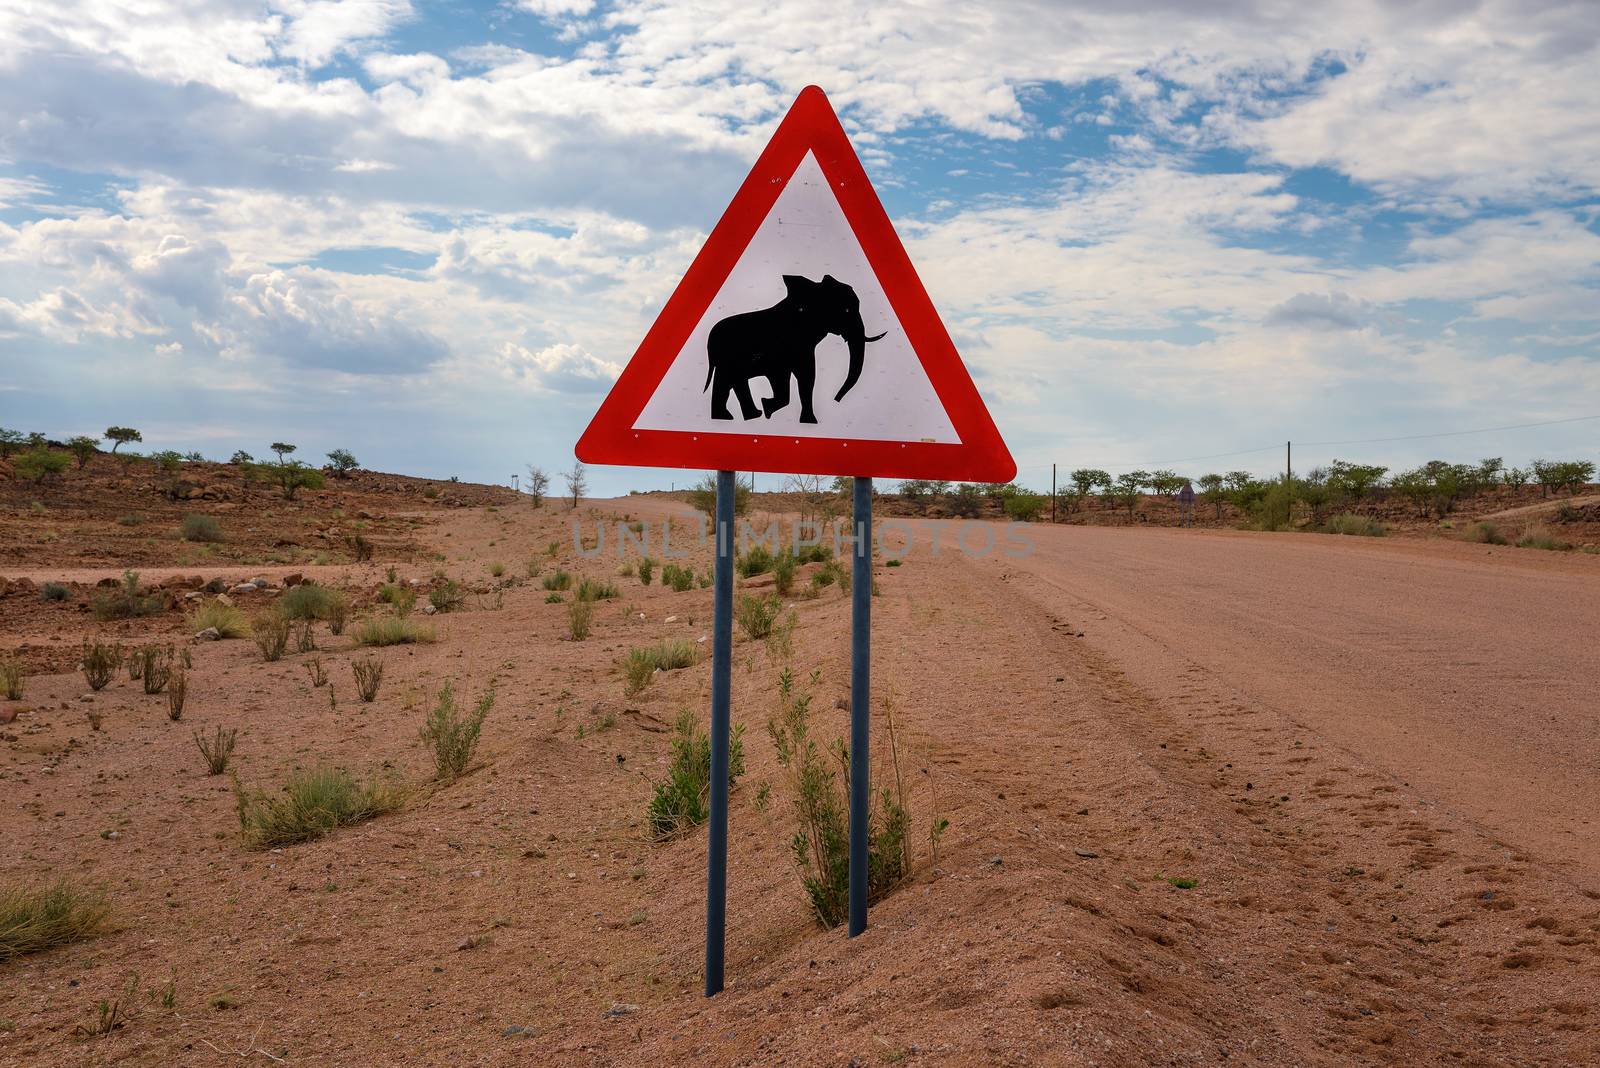 Elephant crossing warning road sign placed by a gravel road in the desert of Namibia.